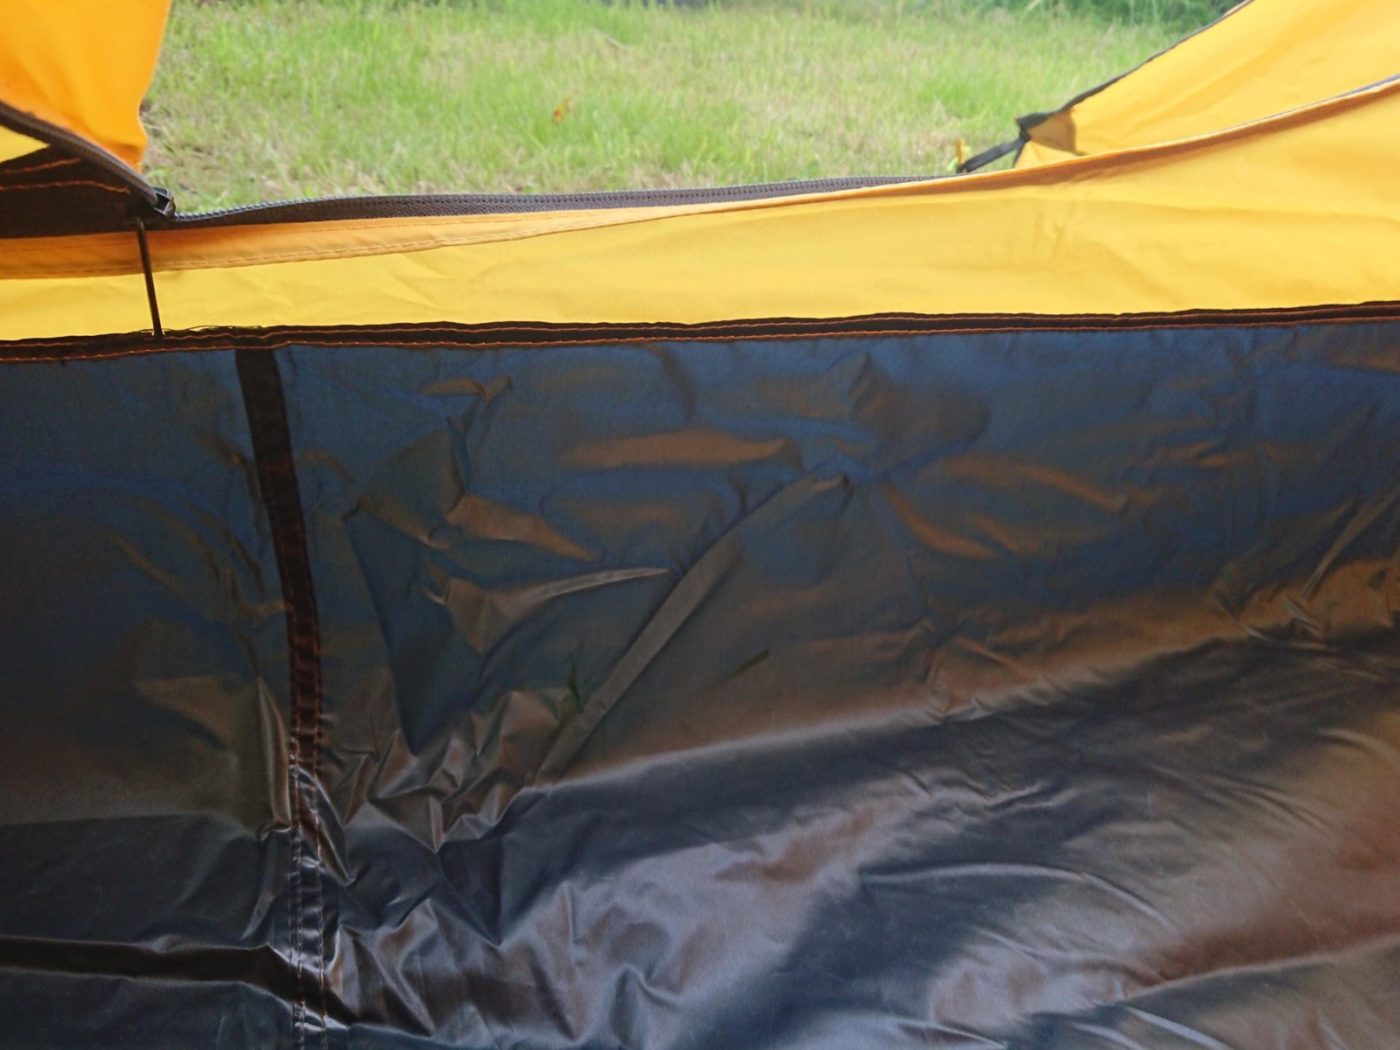 GeerTop Toproad 4plus 4 Person Backpacking Tent